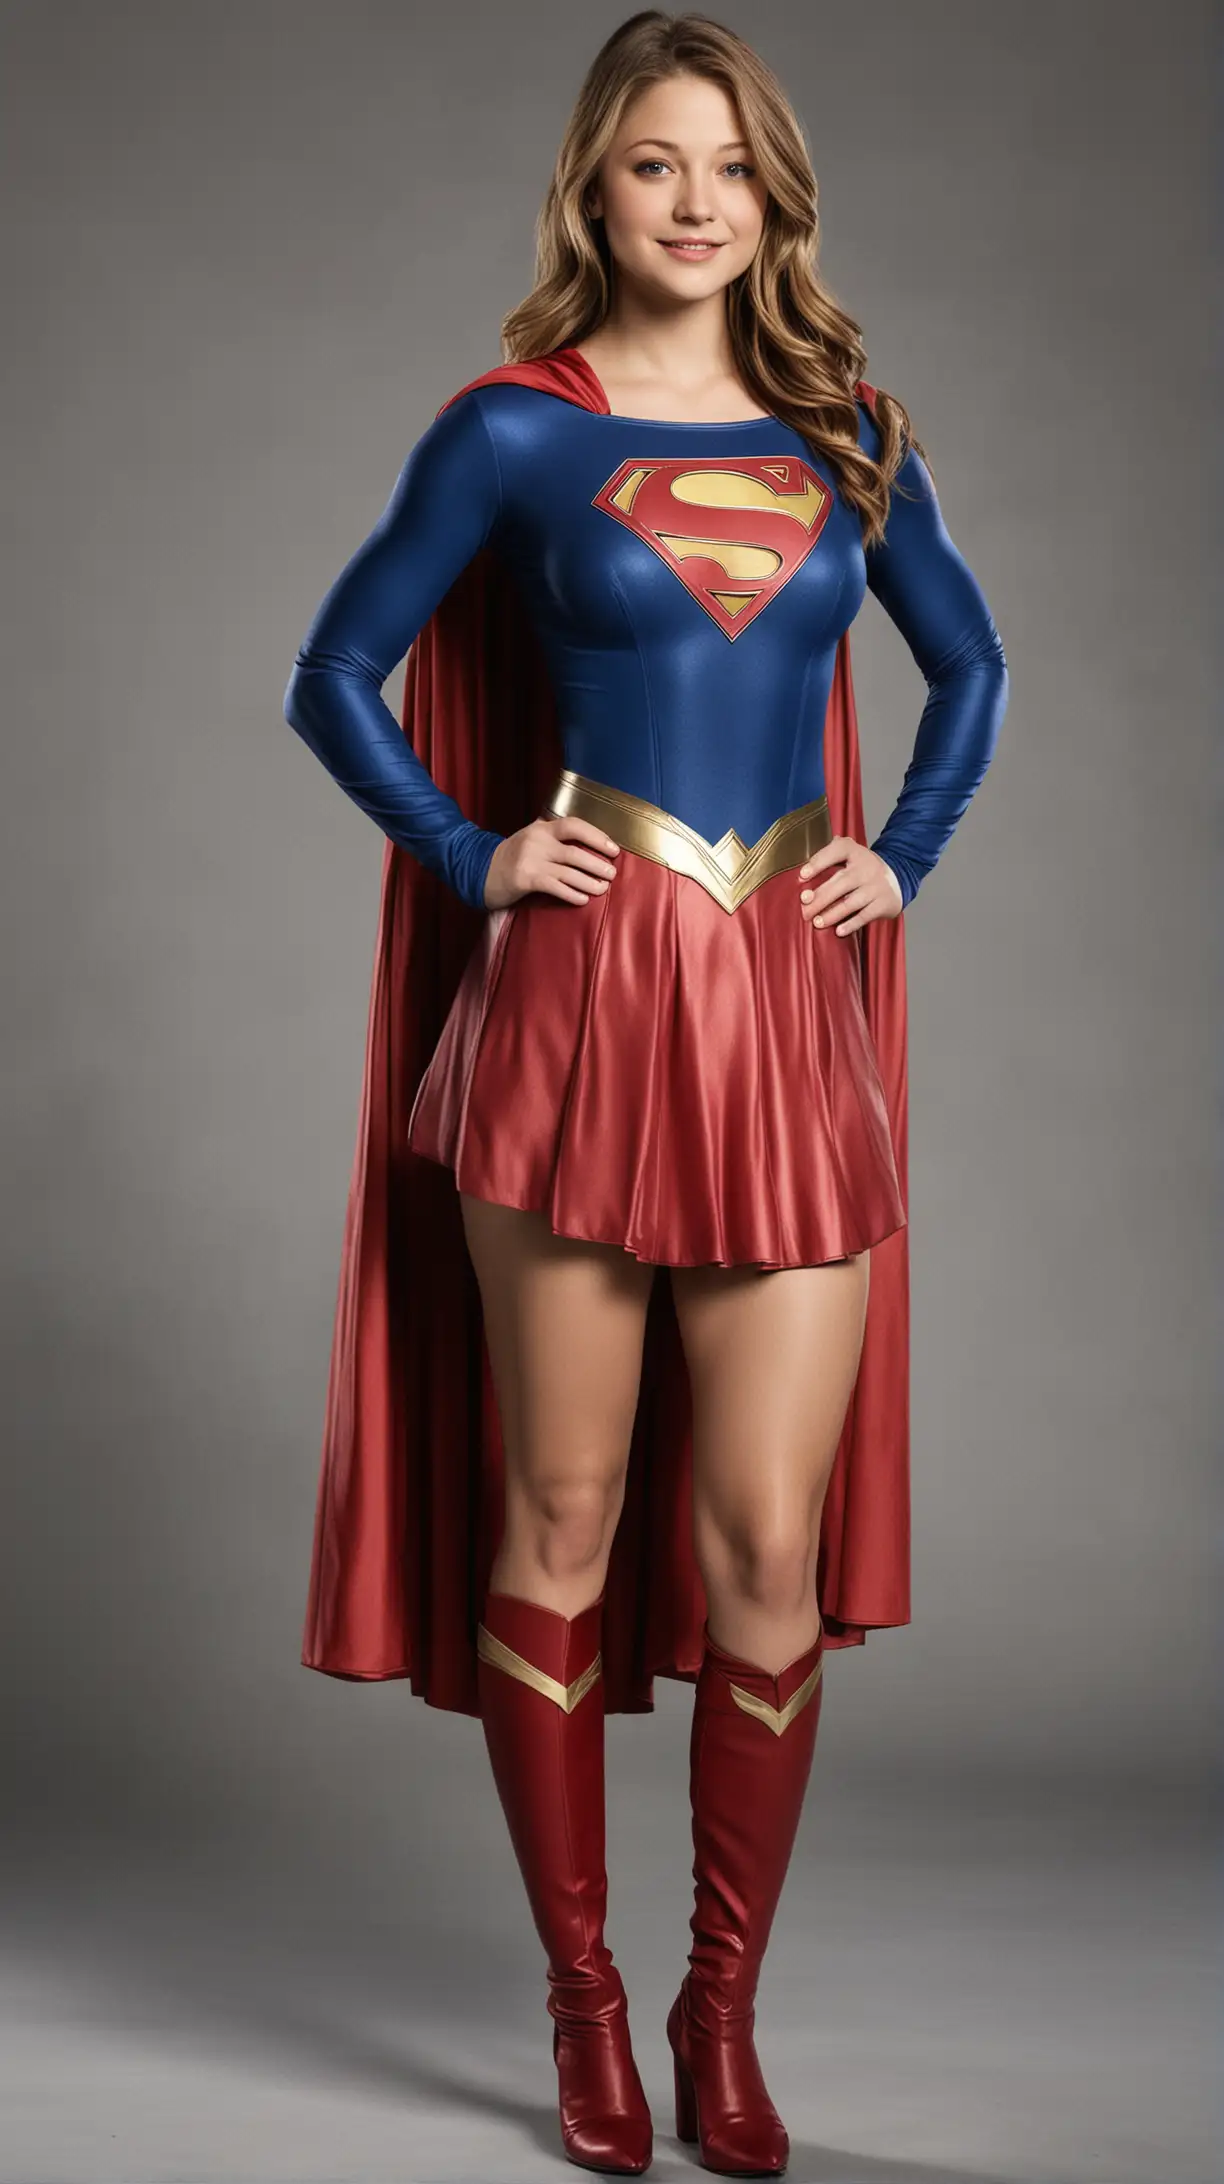 20-year-old Melissa Benoist wearing the supergirl suit.